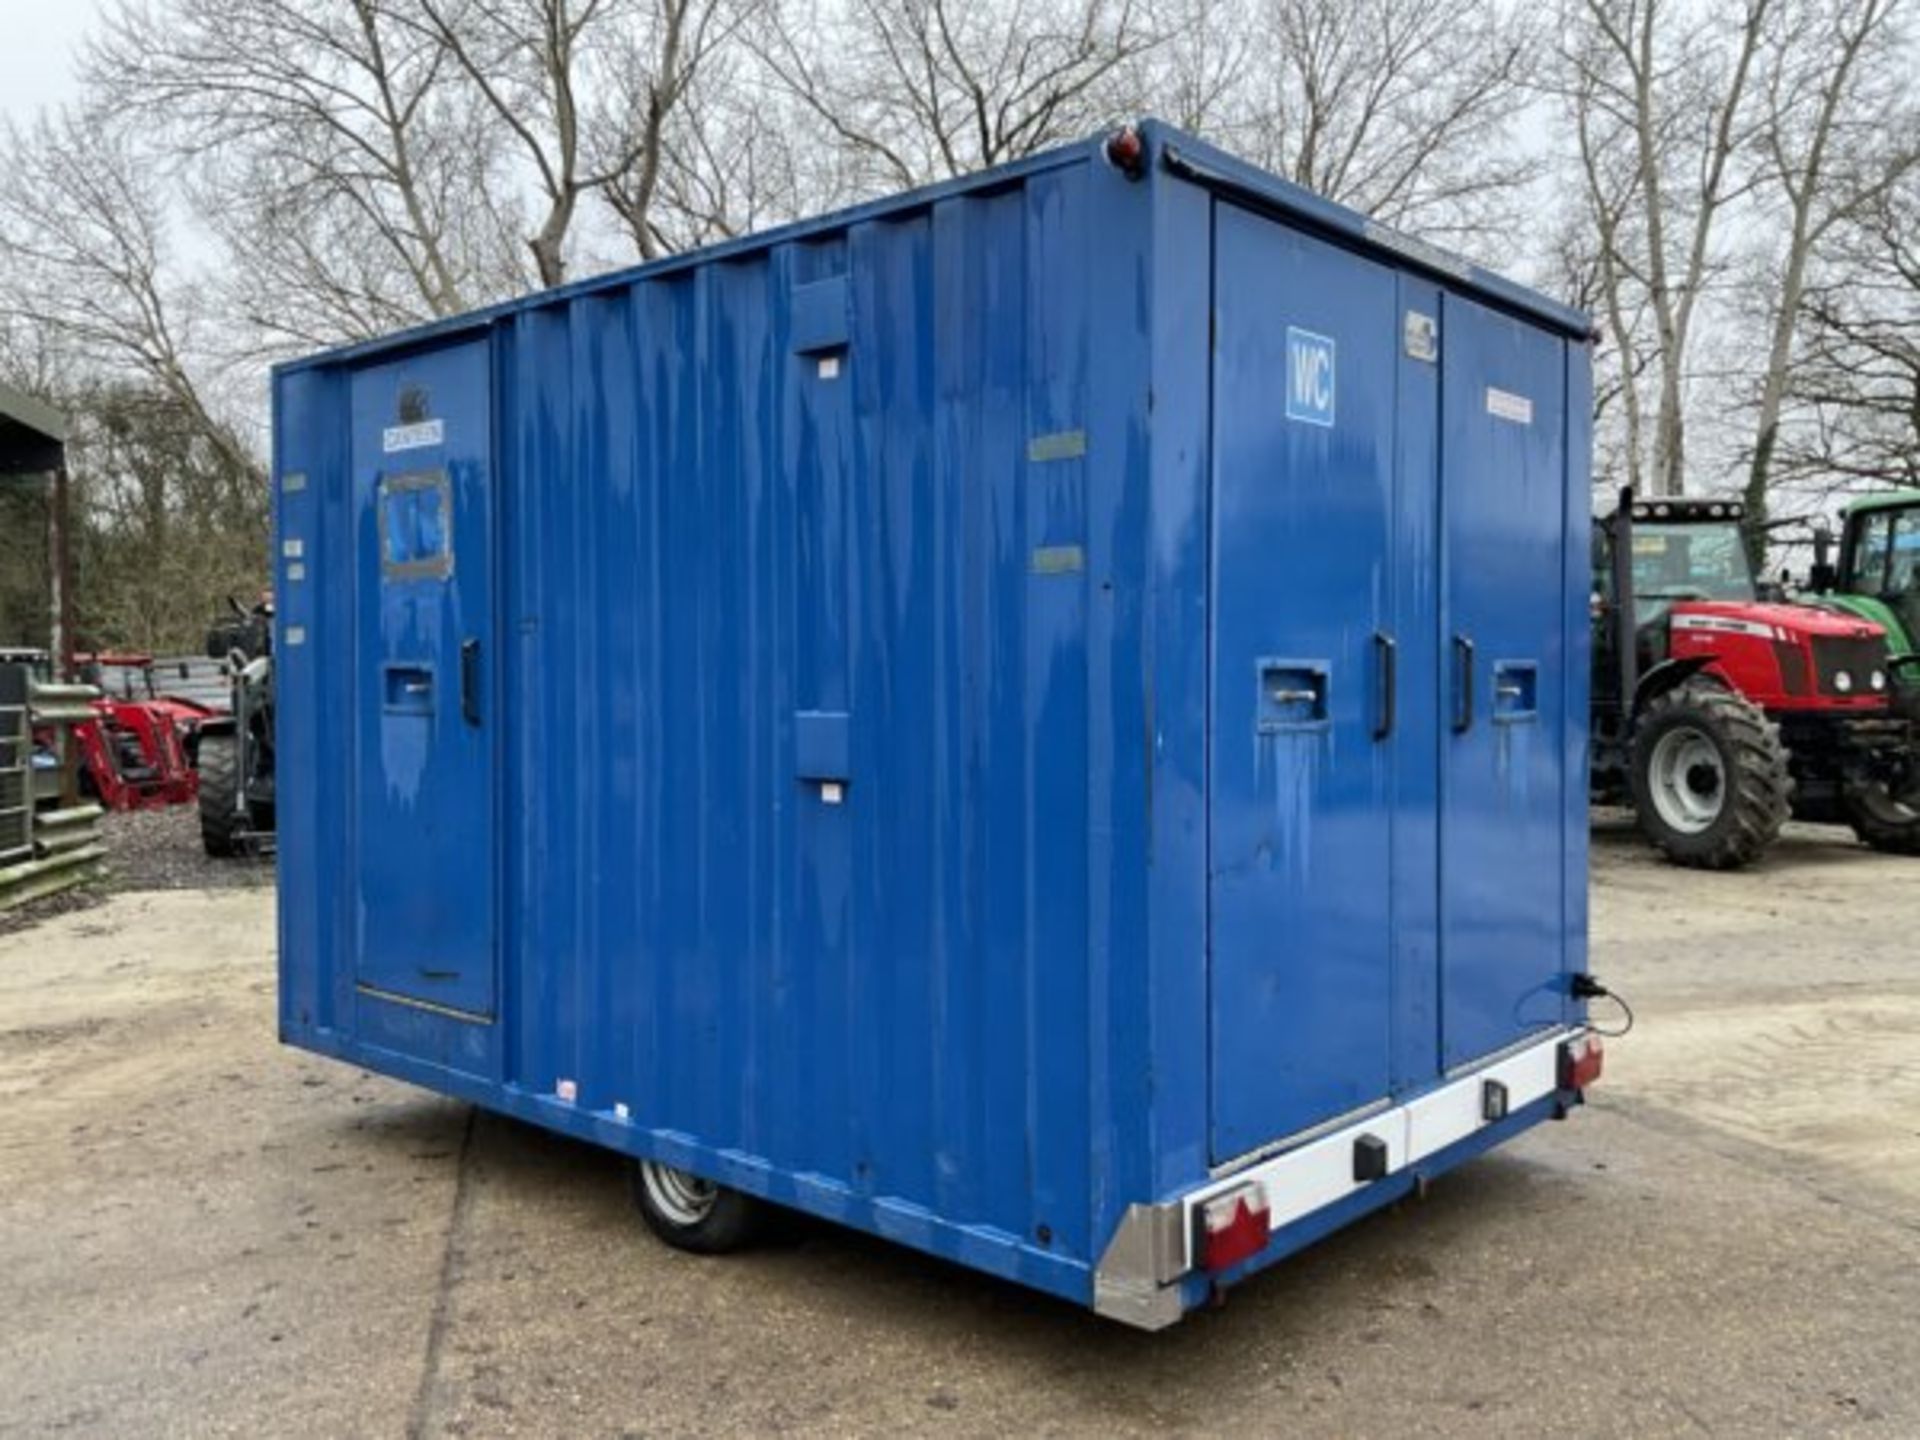 BOSS CABIN WELFARE UNIT WITH KITCHEN/DINING AREA, W/C, AND RED BOX POWER GENERATOR - Bild 6 aus 10